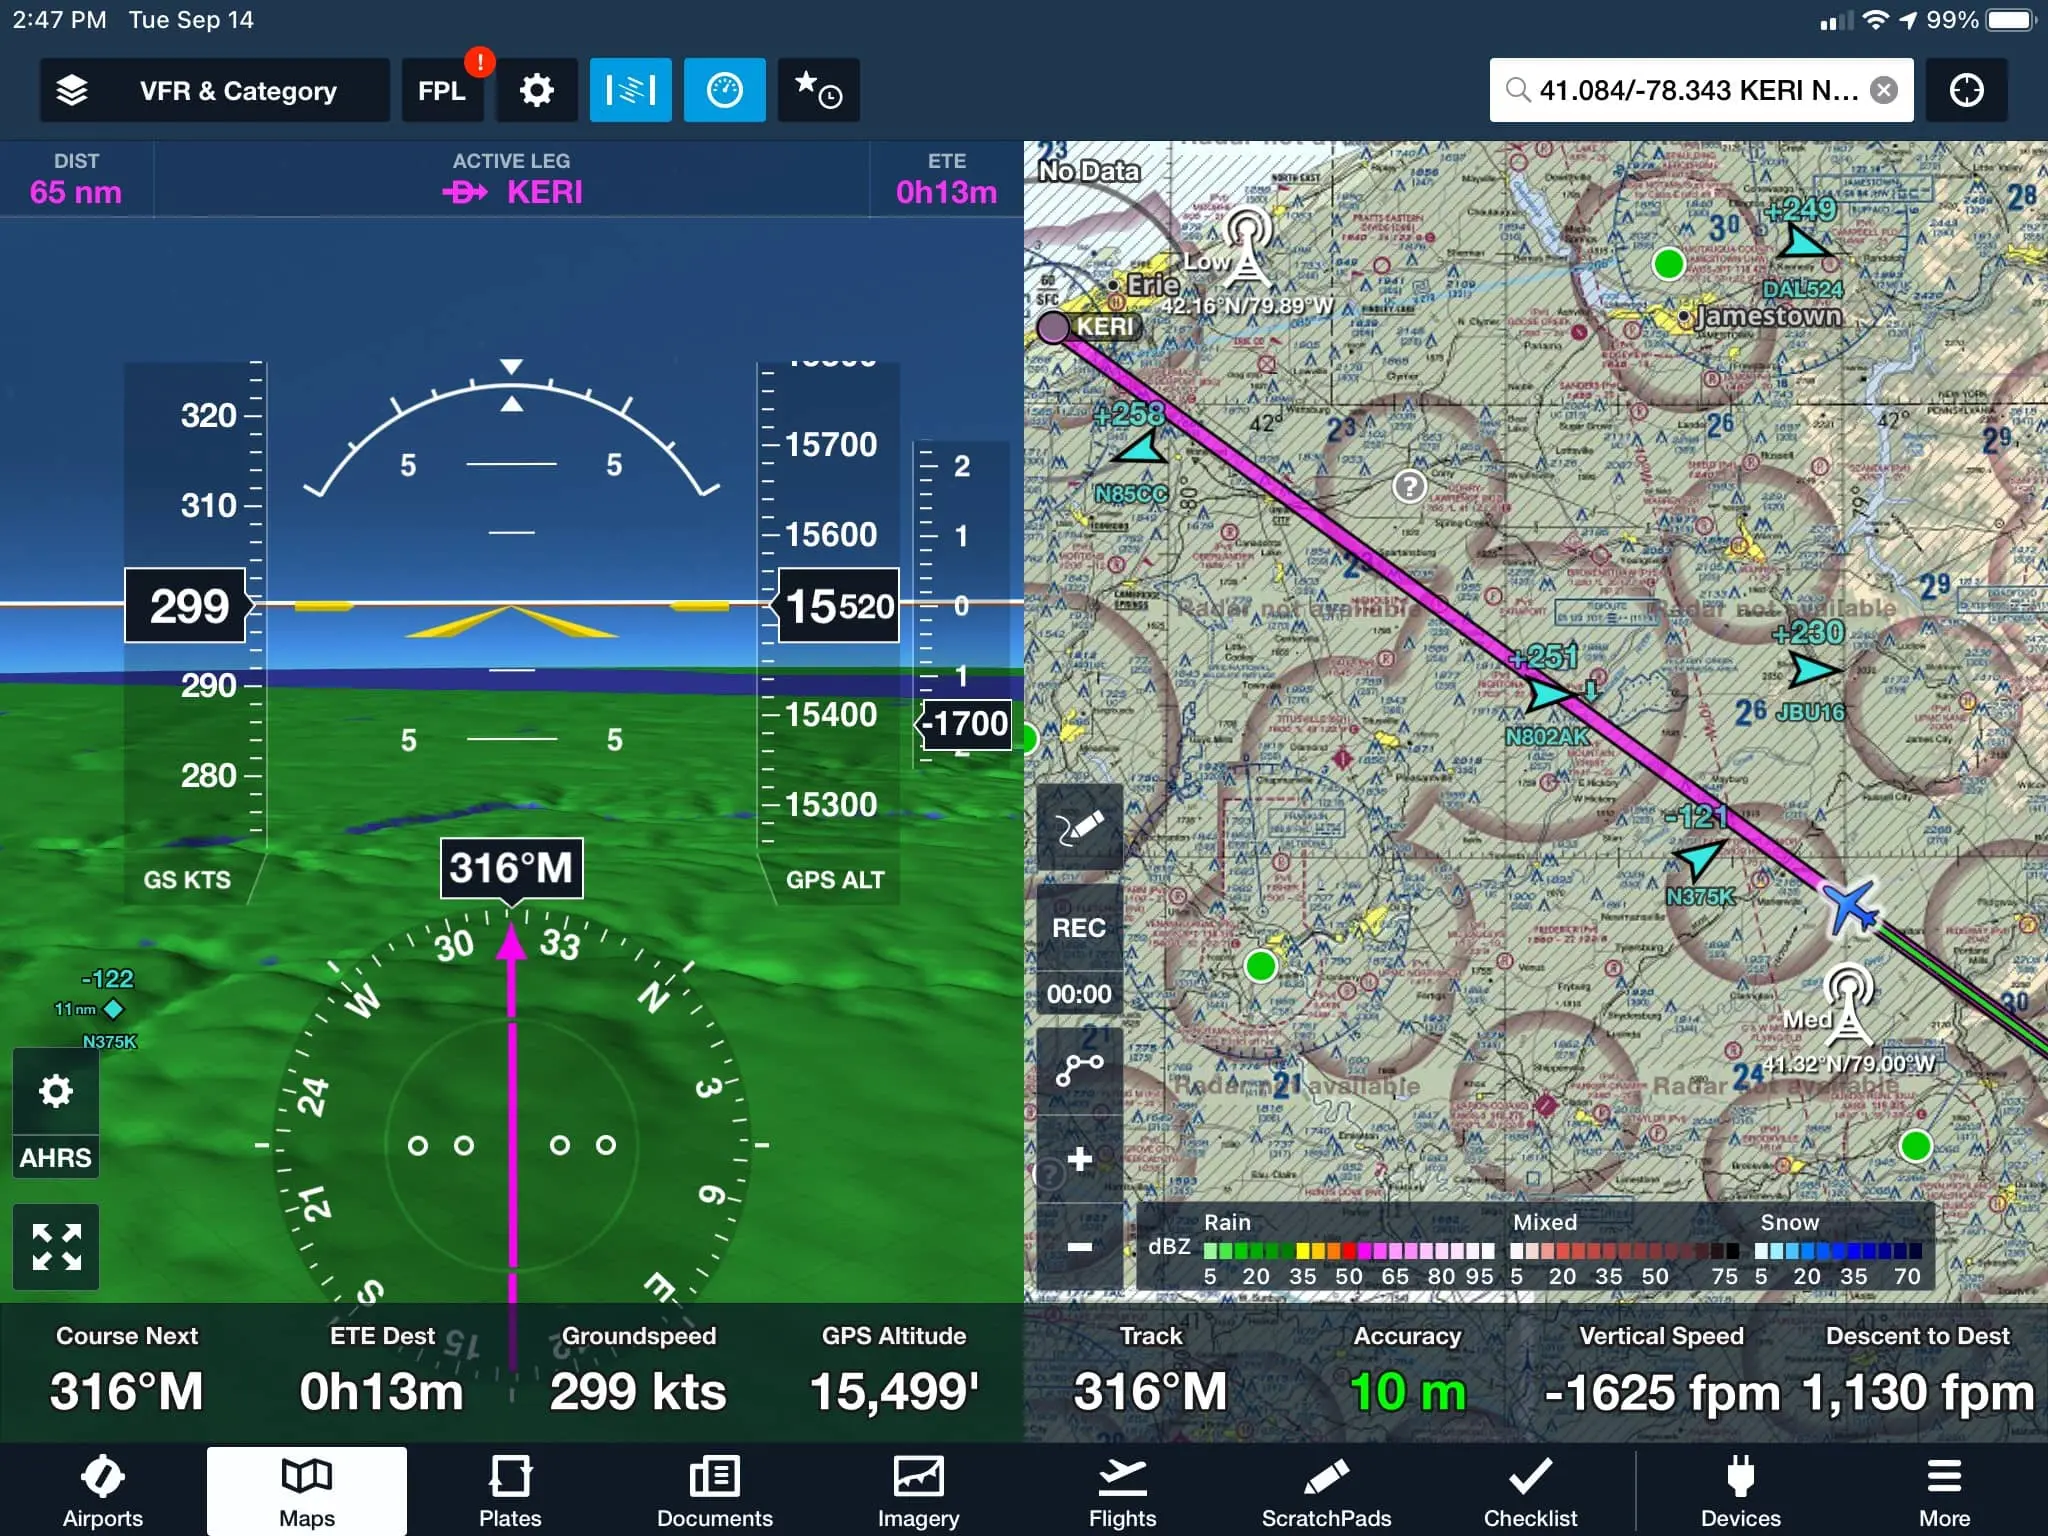 ForeFlight software depicts a mapped flight plan to Erie Airport, and displays flight data including coordinates, groundspeed, and GPS altitude.